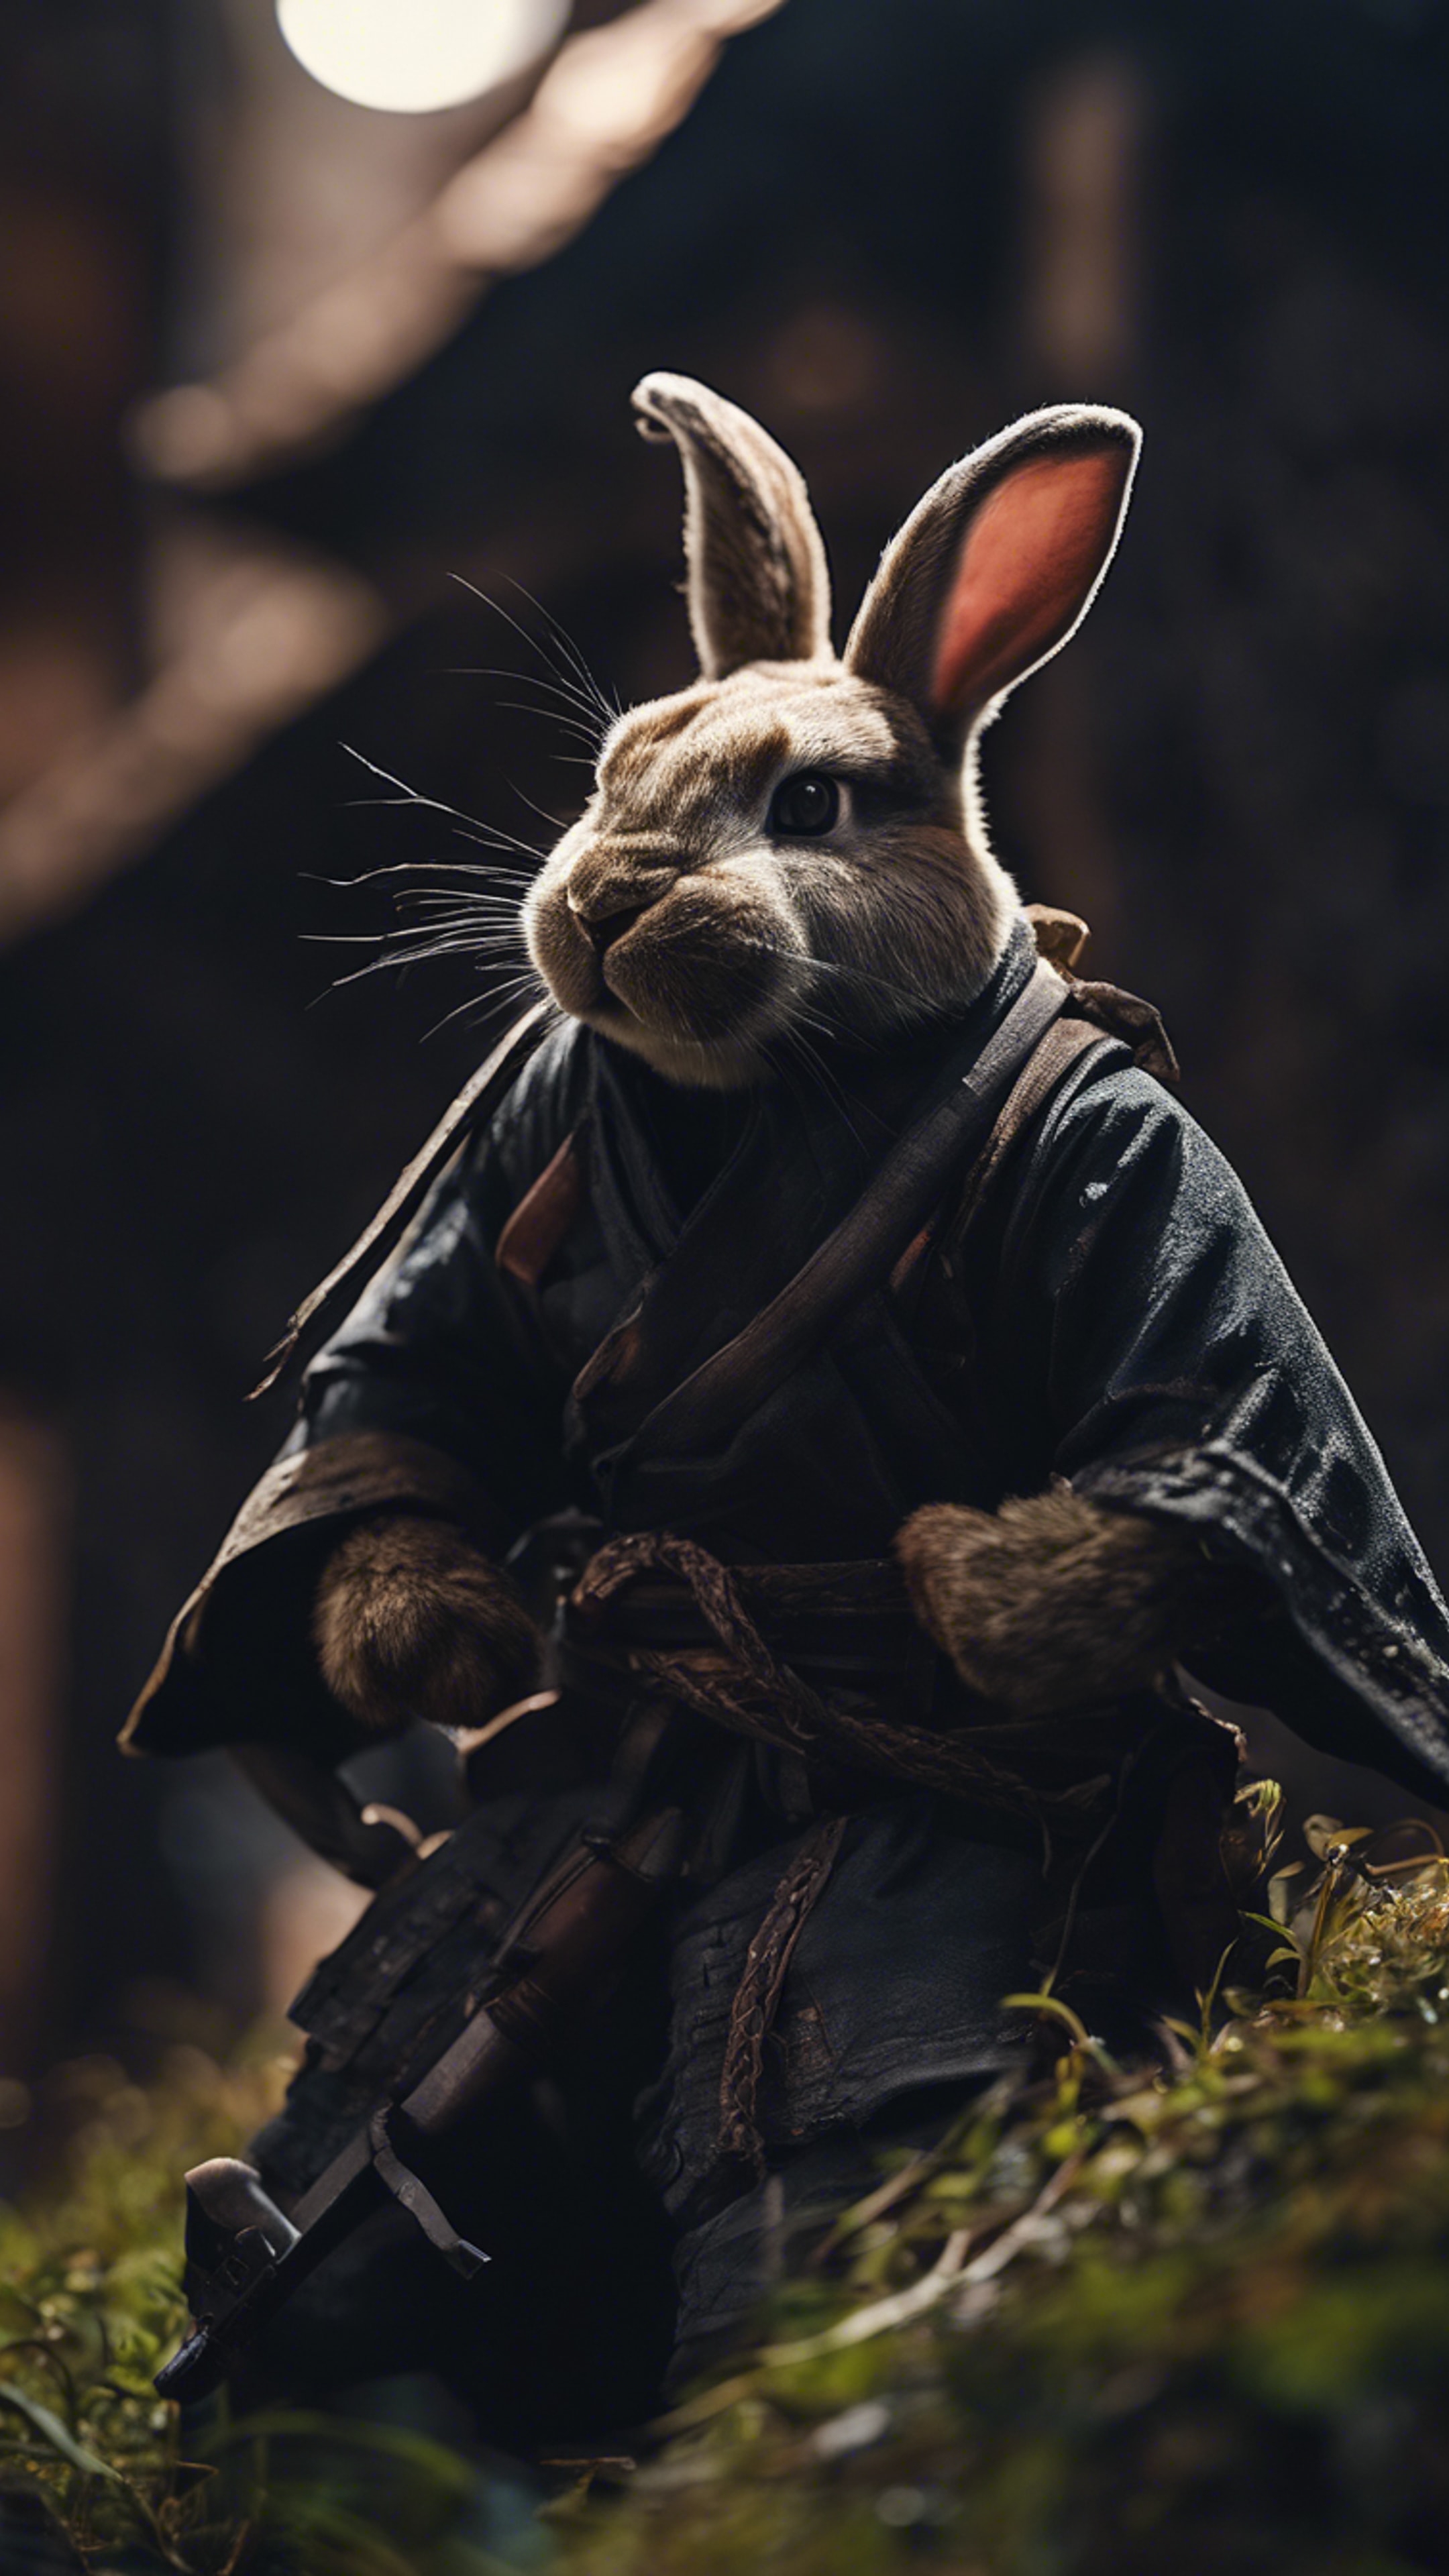 A rabbit ninja stealthily infiltrating a fortress under the cover of darkness. Fondo de pantalla[6531f33b70ff4f28bd8a]